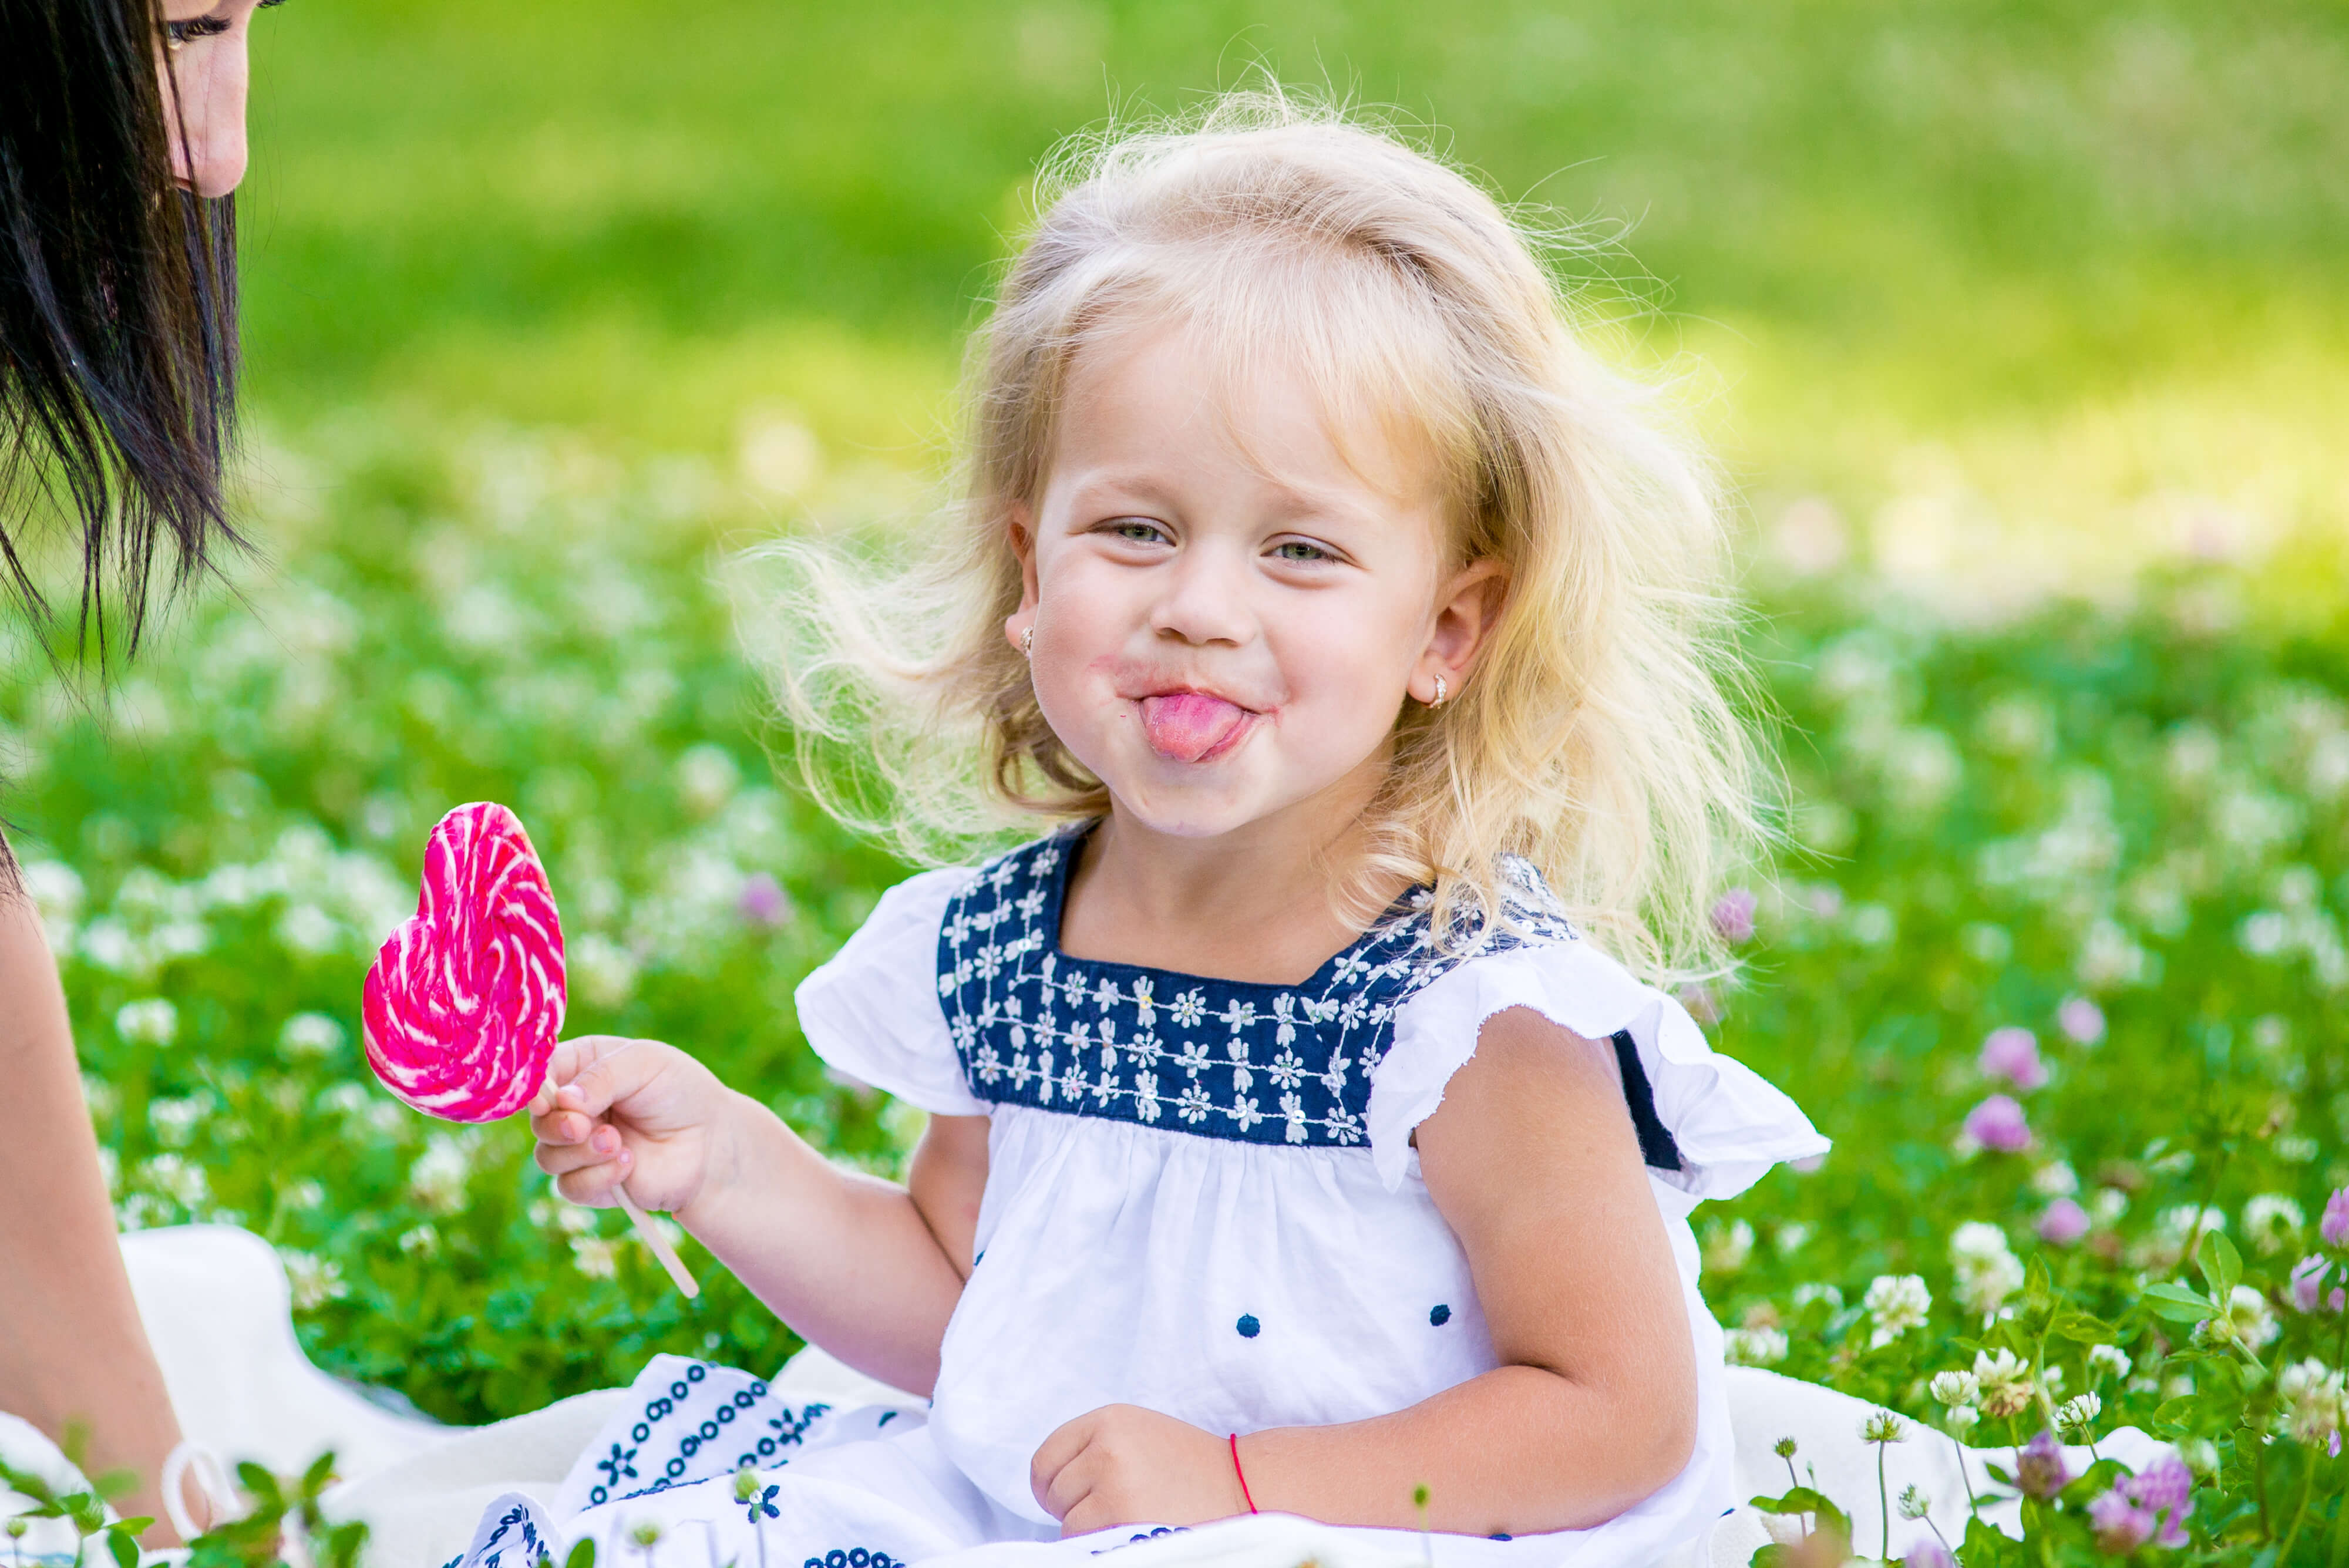 Divorce - Child Support - Look at this cute little blond with a heart lollipop. Let us focus on the positives in our life